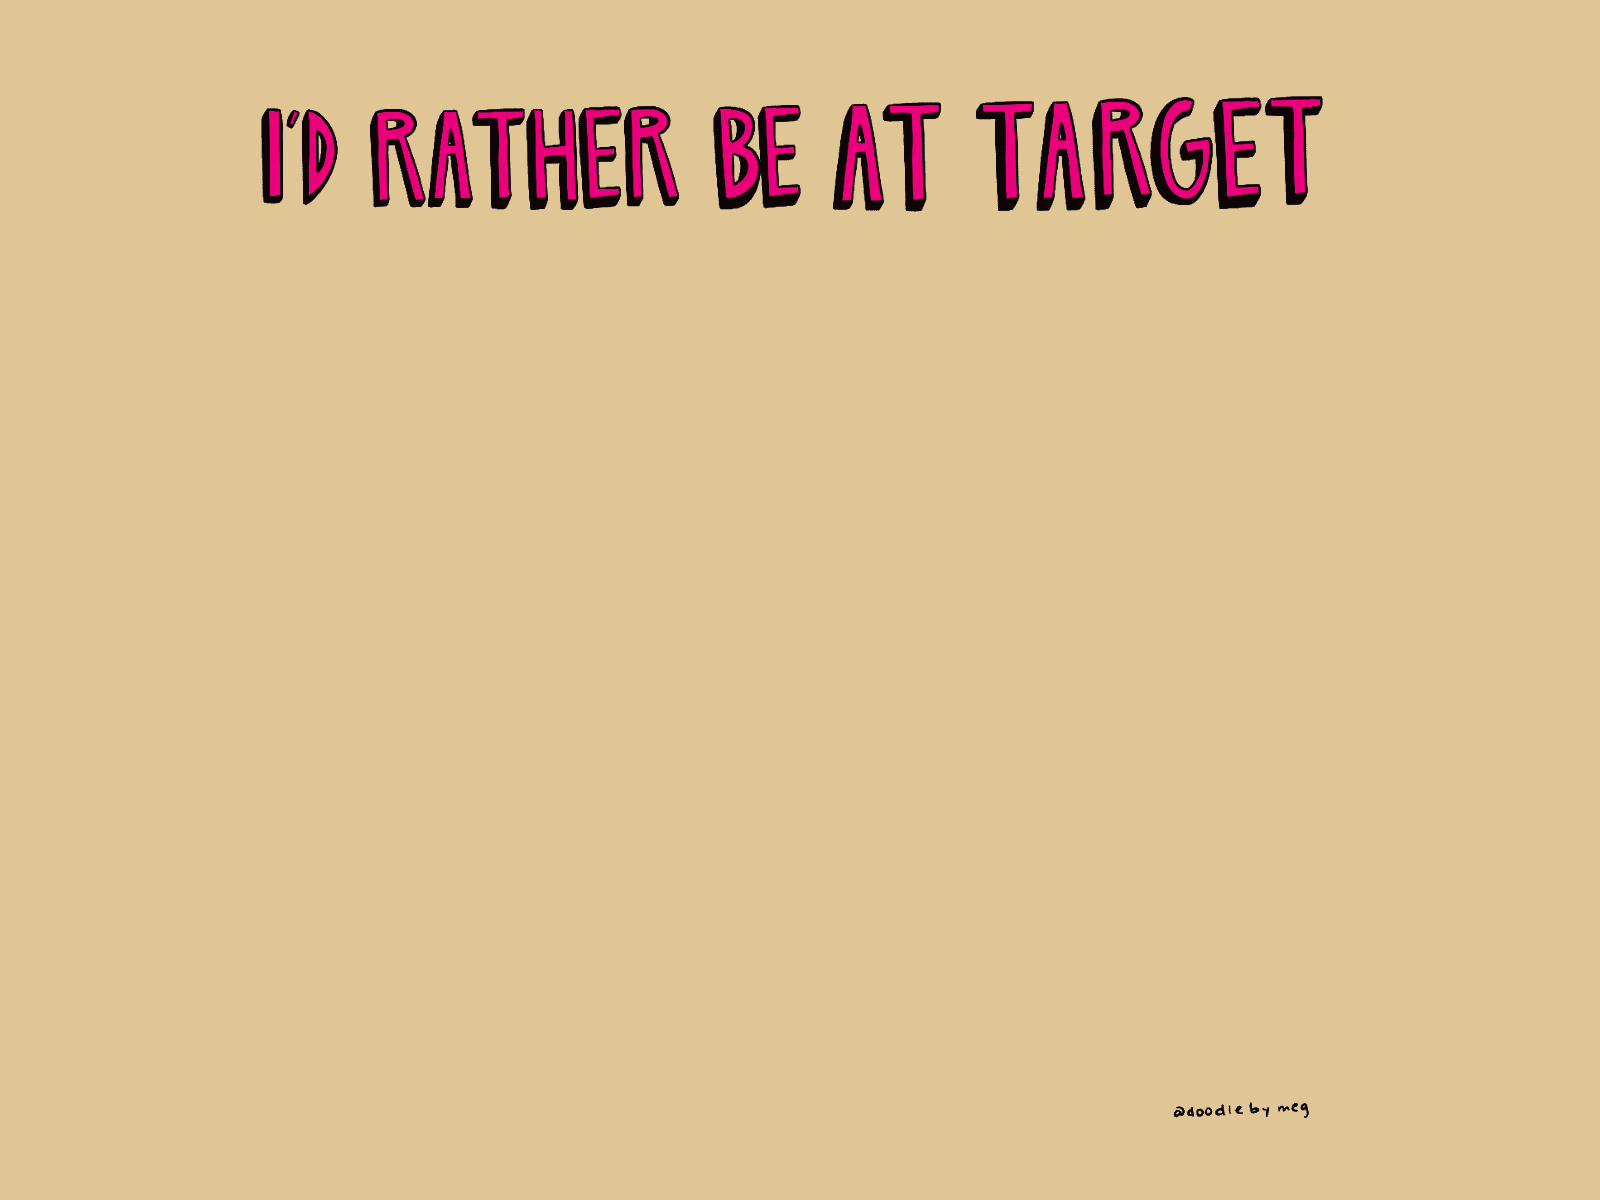 I'd Rather Be at Target gif 2020 design drawing funny gif gif animated gif animation illustration lettering procreate procreate 5 quote quote design quotes retro target typography vintage